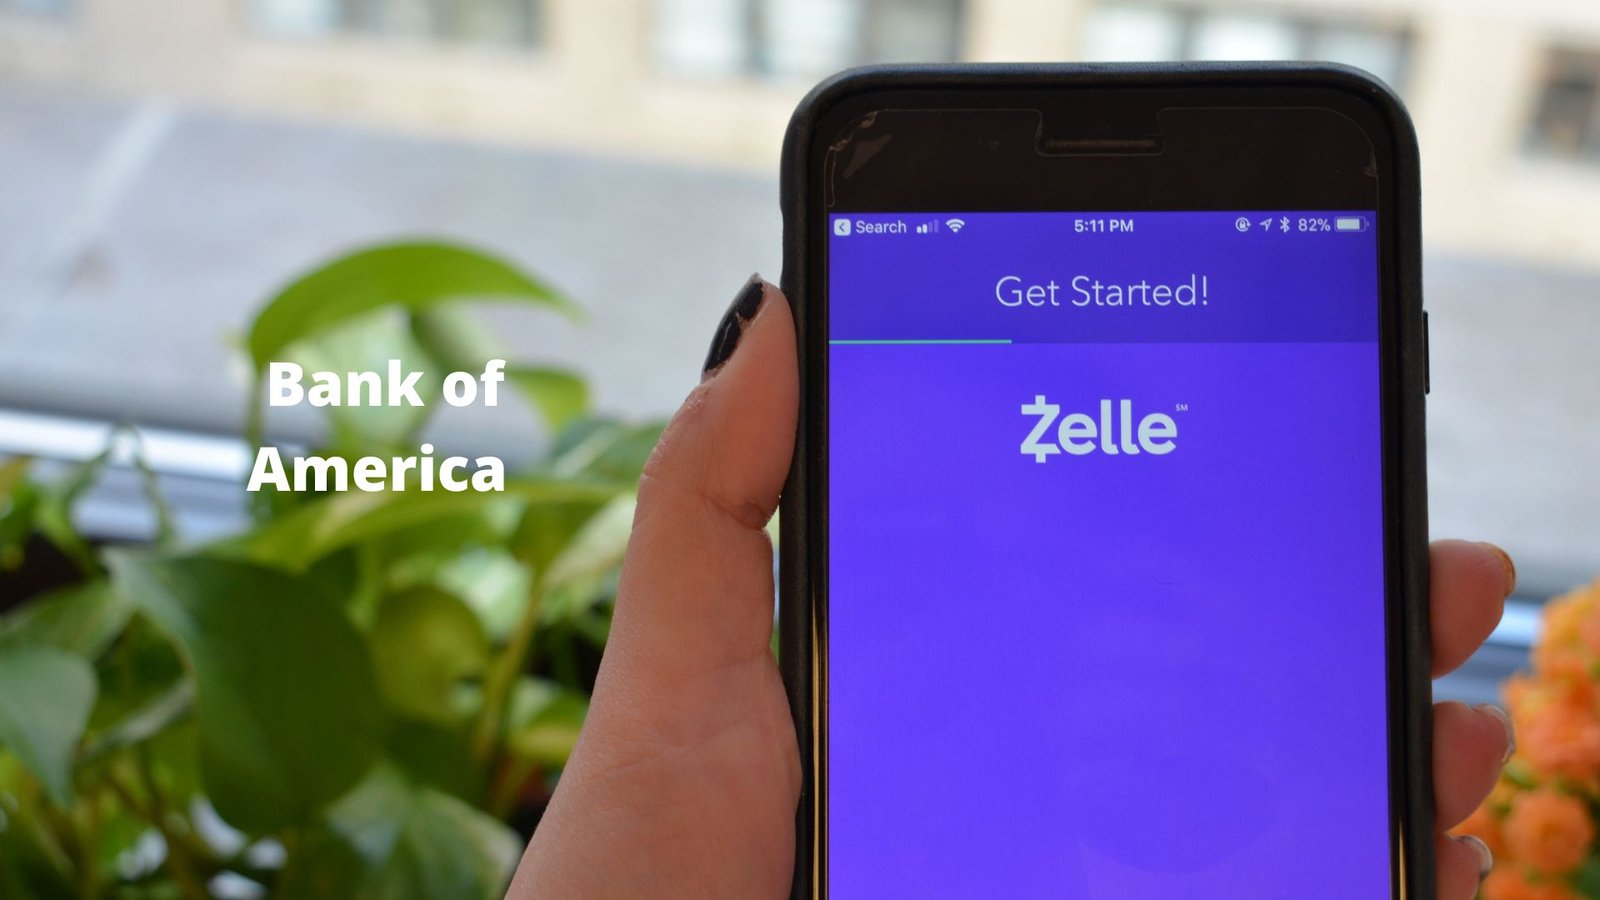 does bank of america have zelle